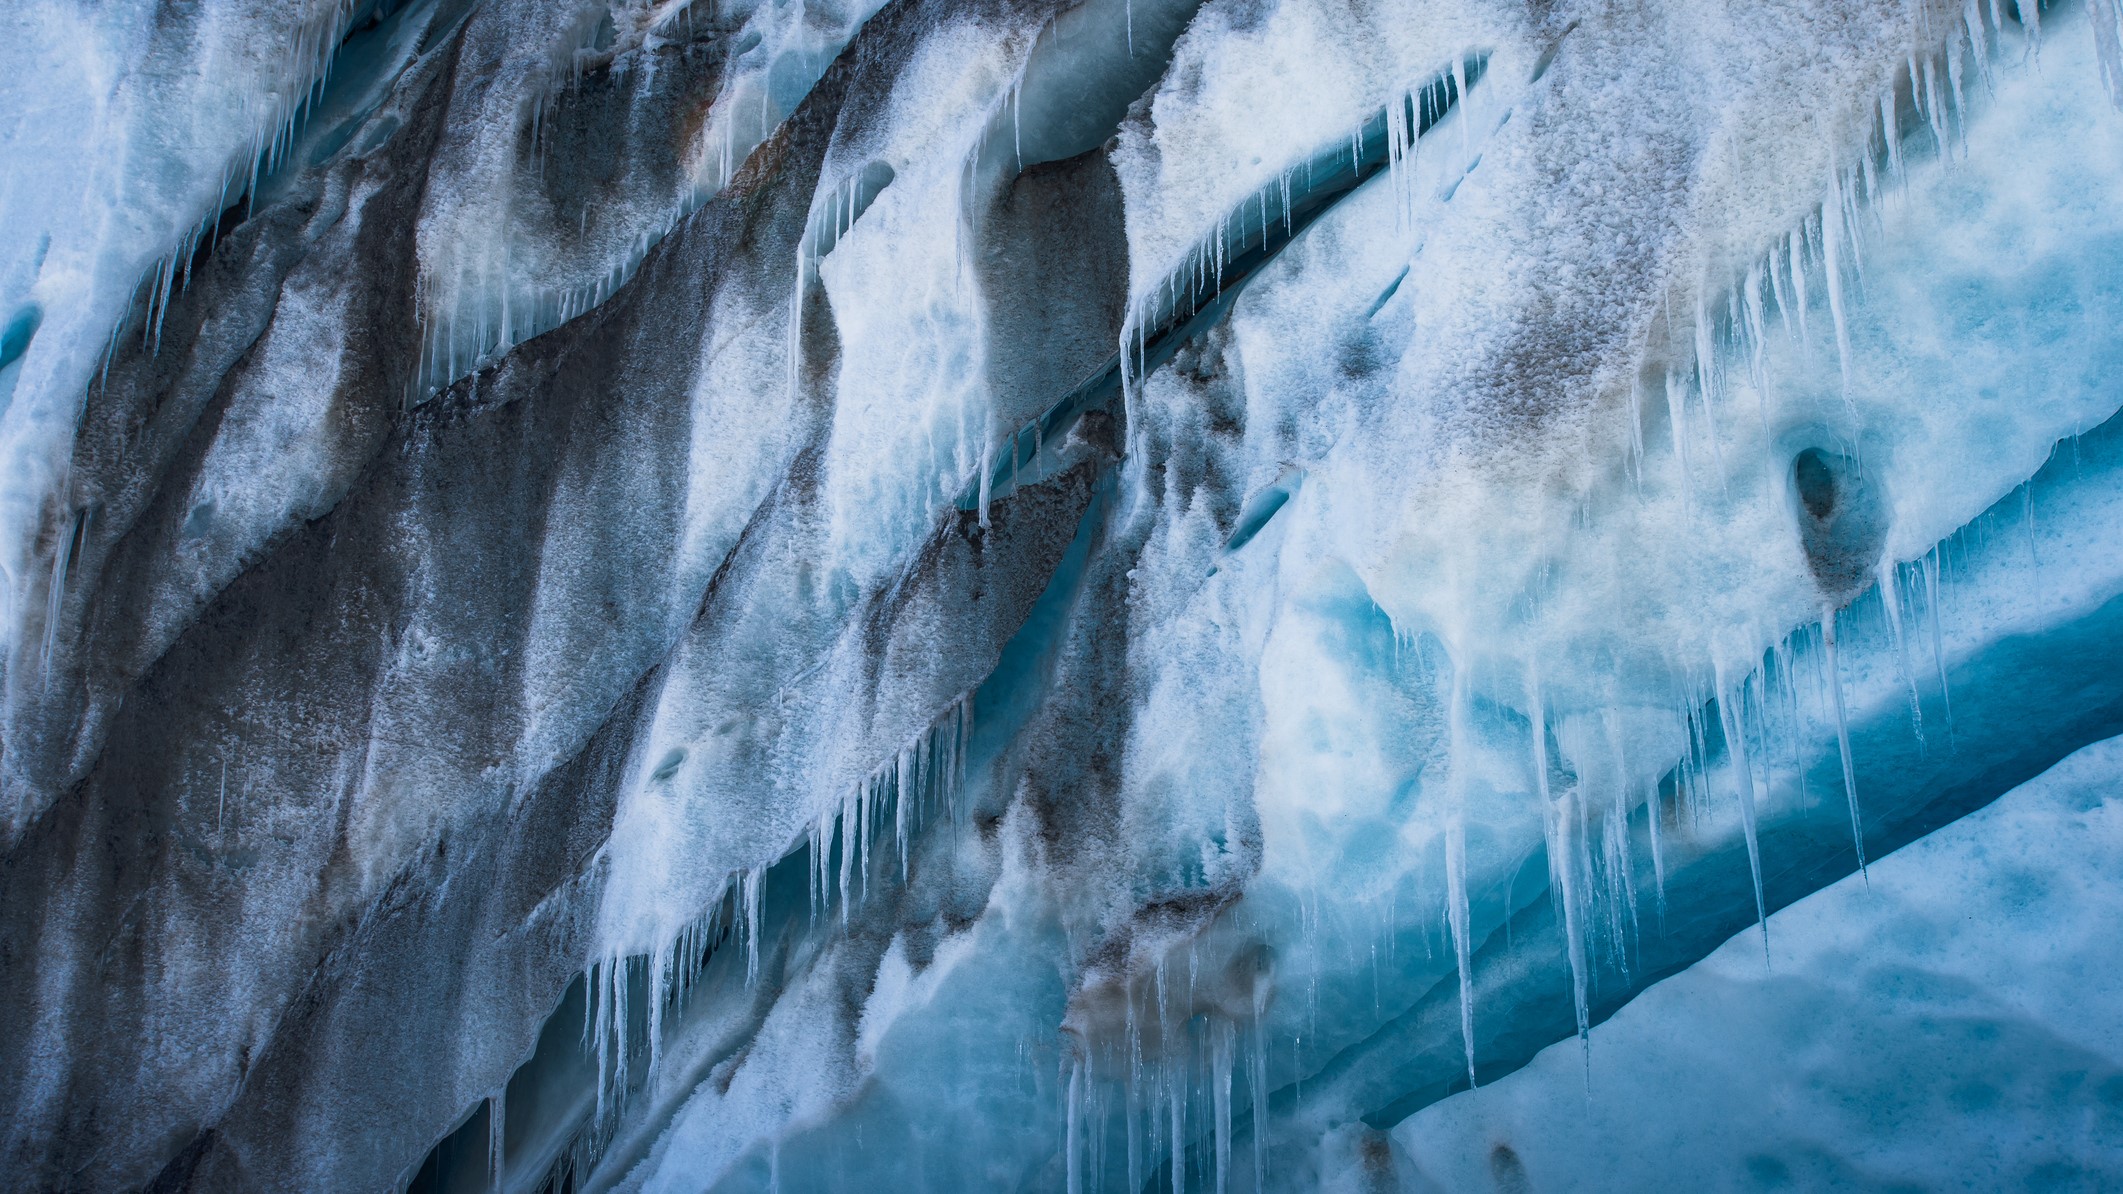 Layers of ice hanging off a glacier melt and drip water.